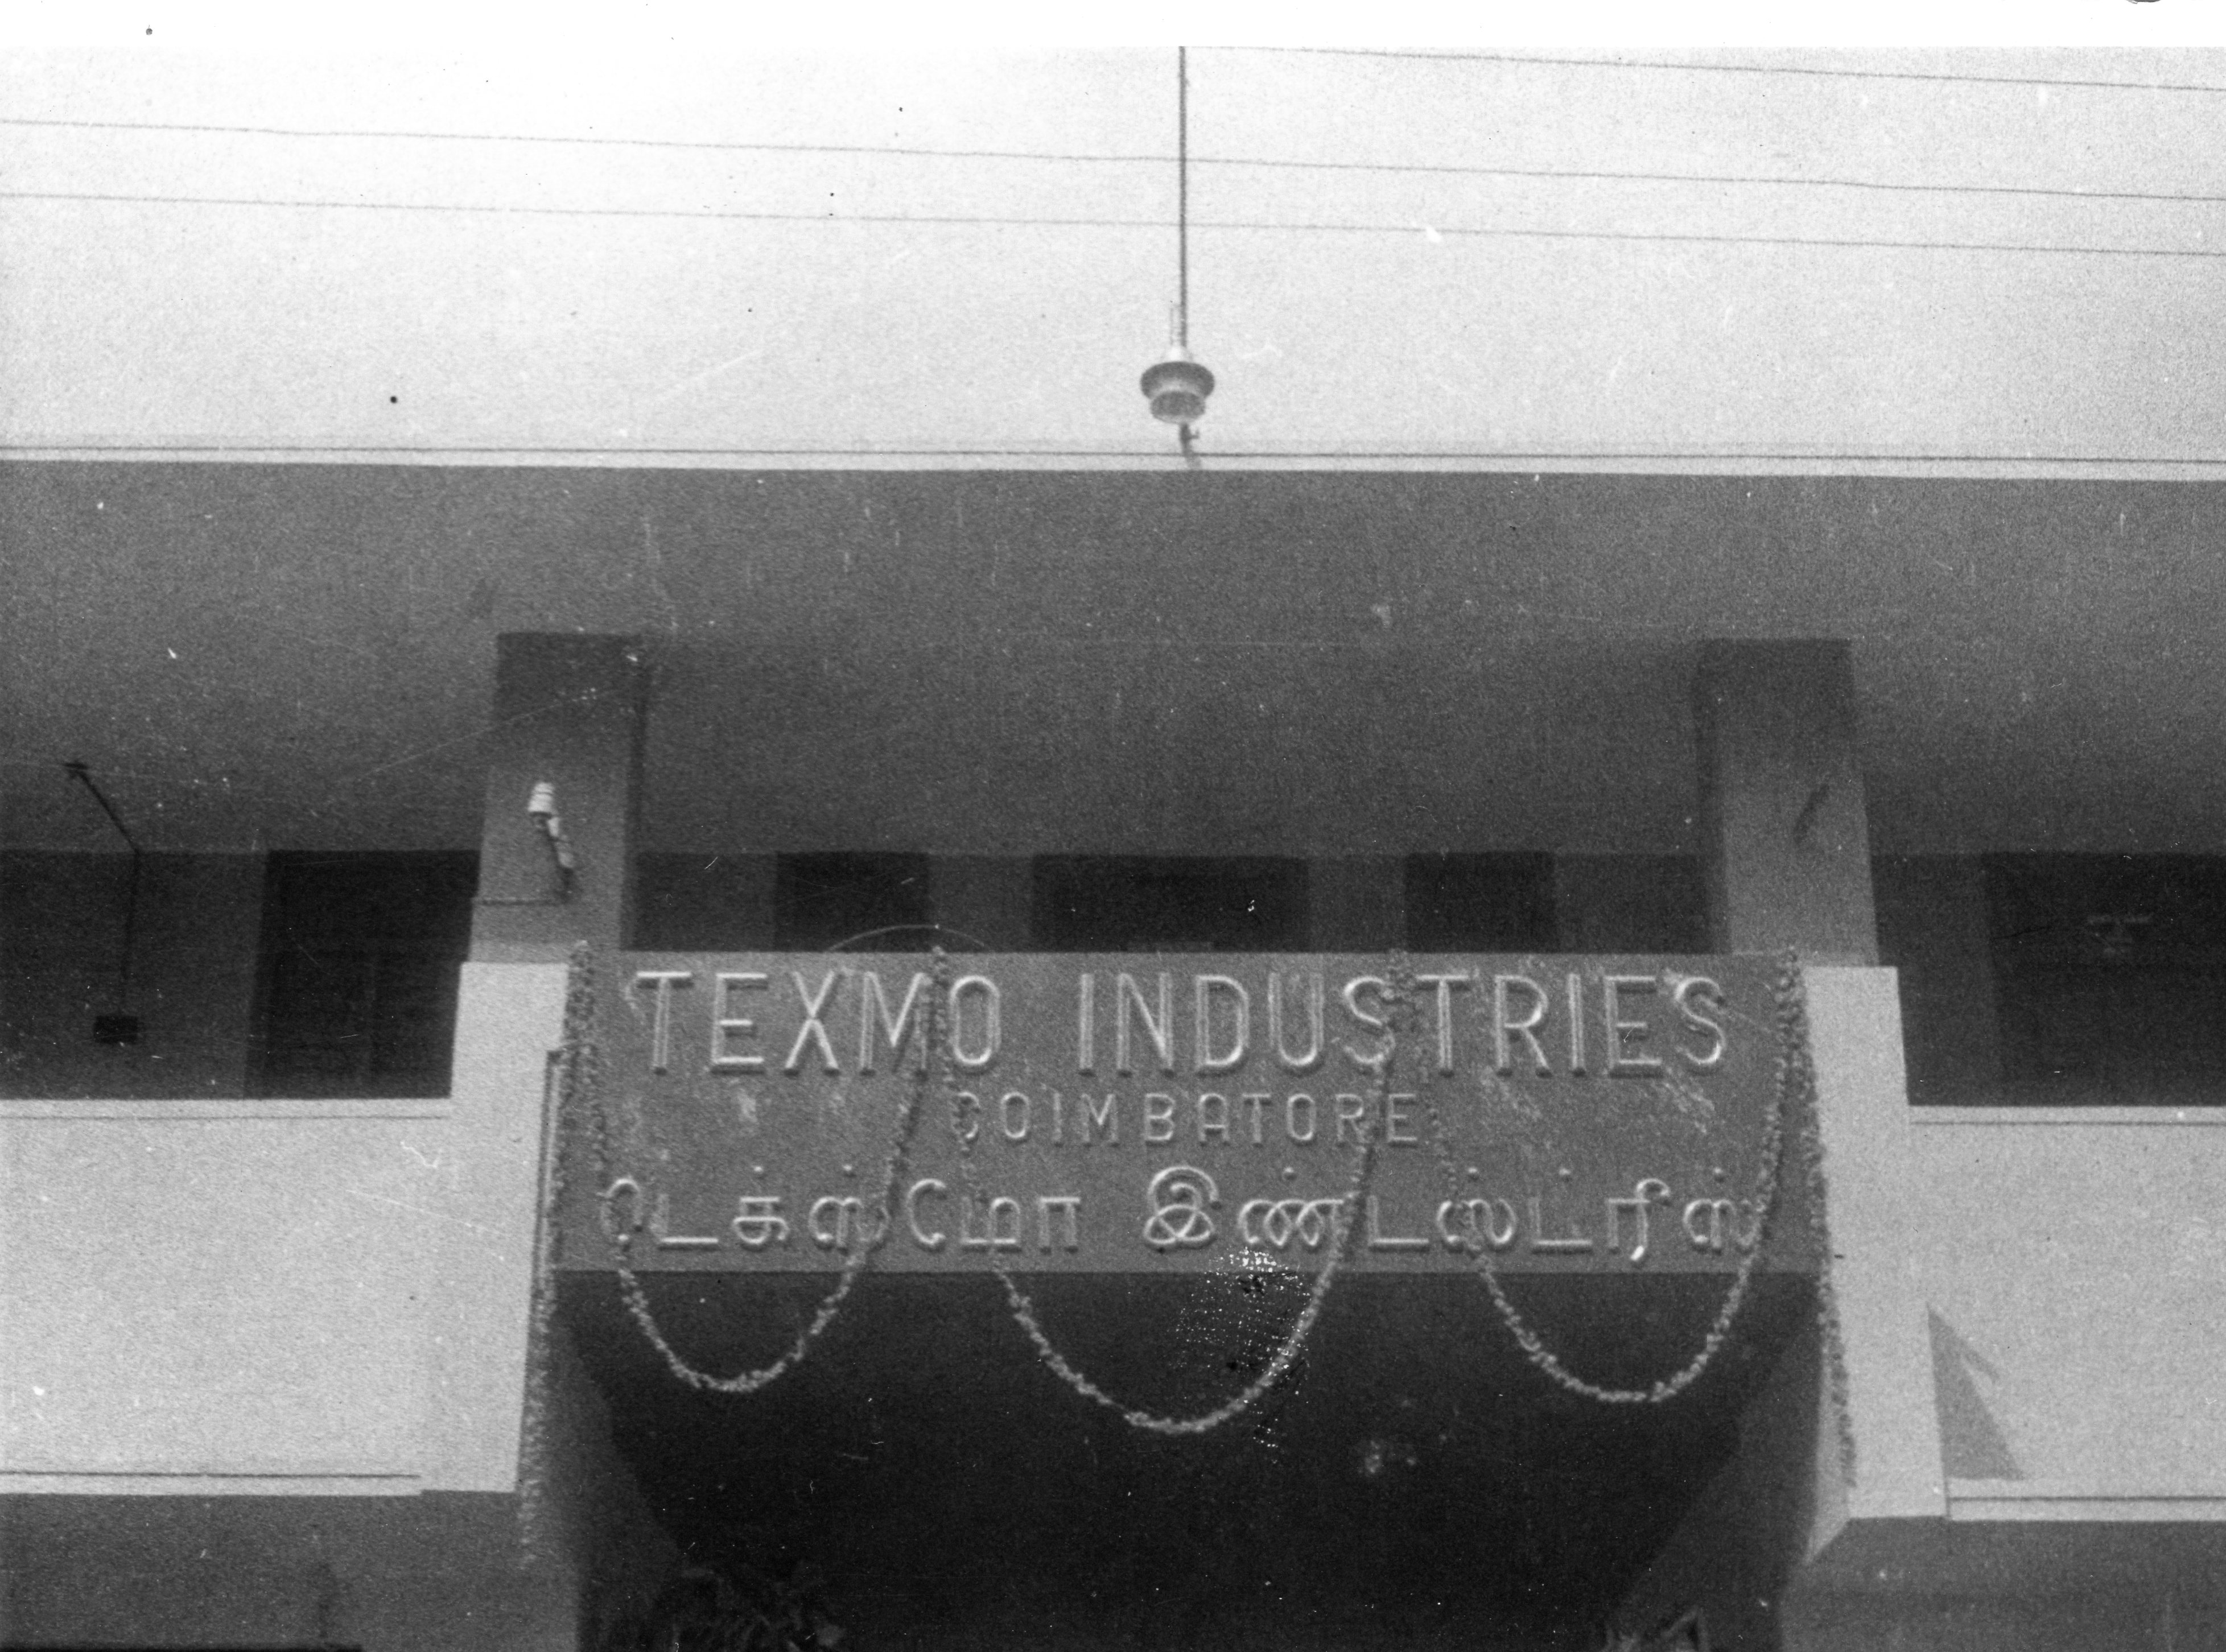 Photo of Texmo Industries from 1956